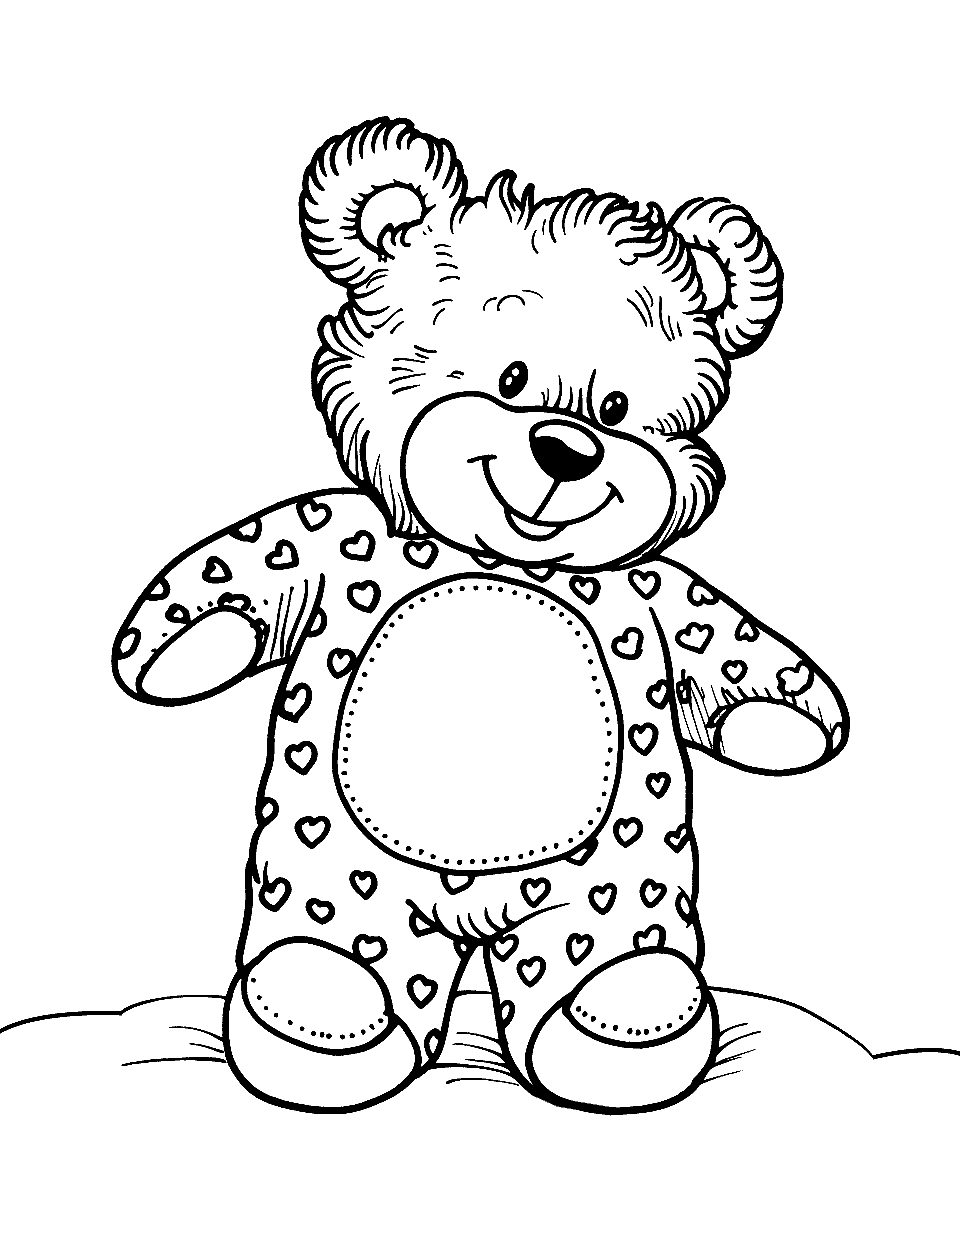 35 Teddy Bear Coloring Pages: Free Printable Sheets